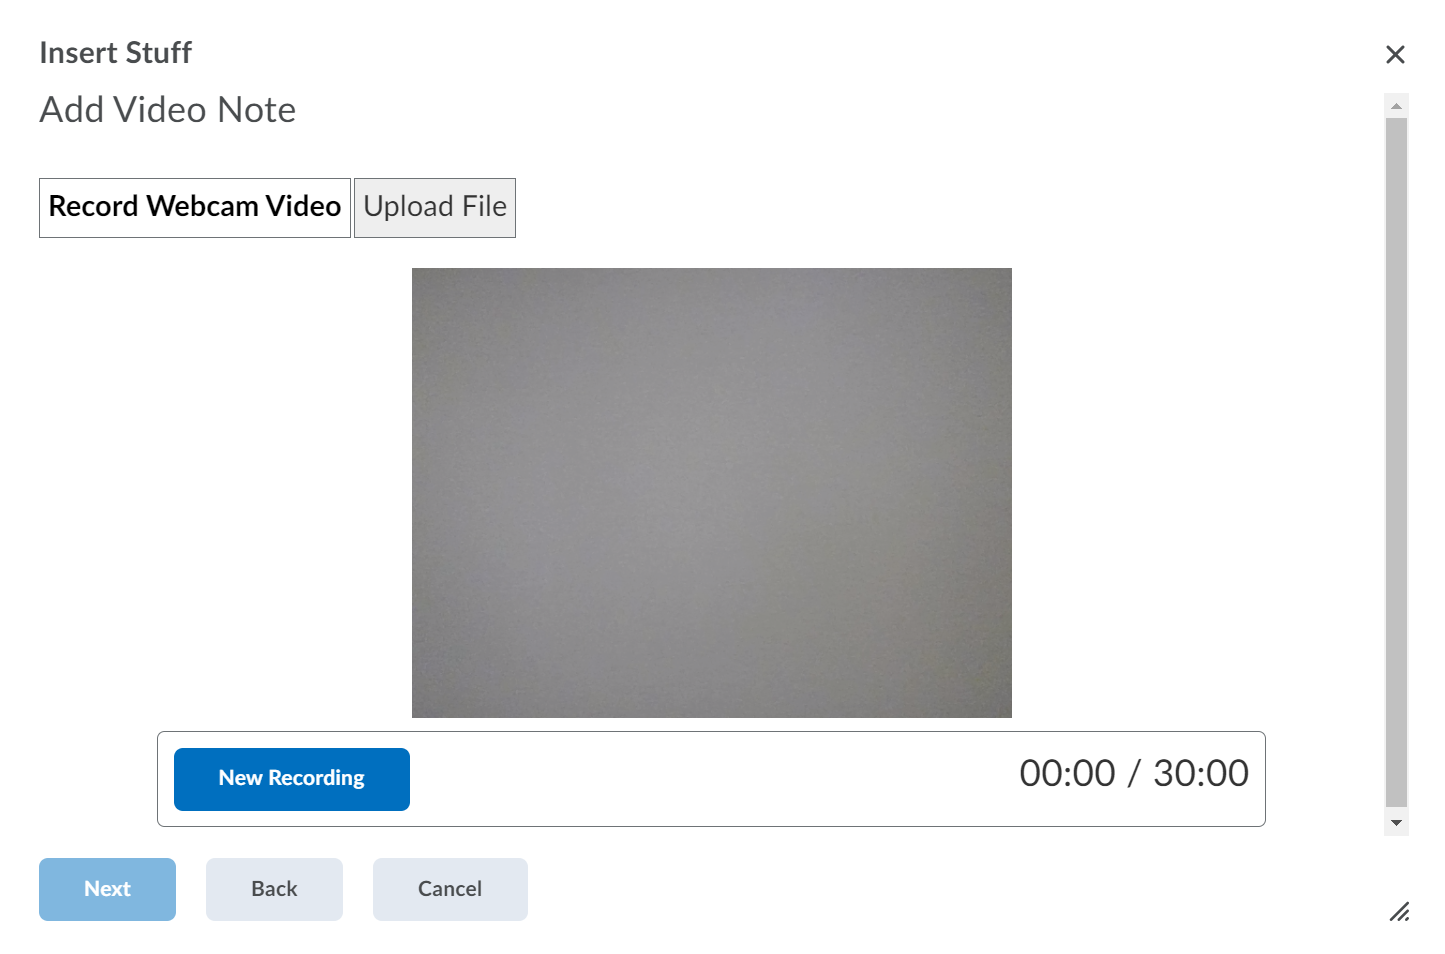 Add Video Note page.